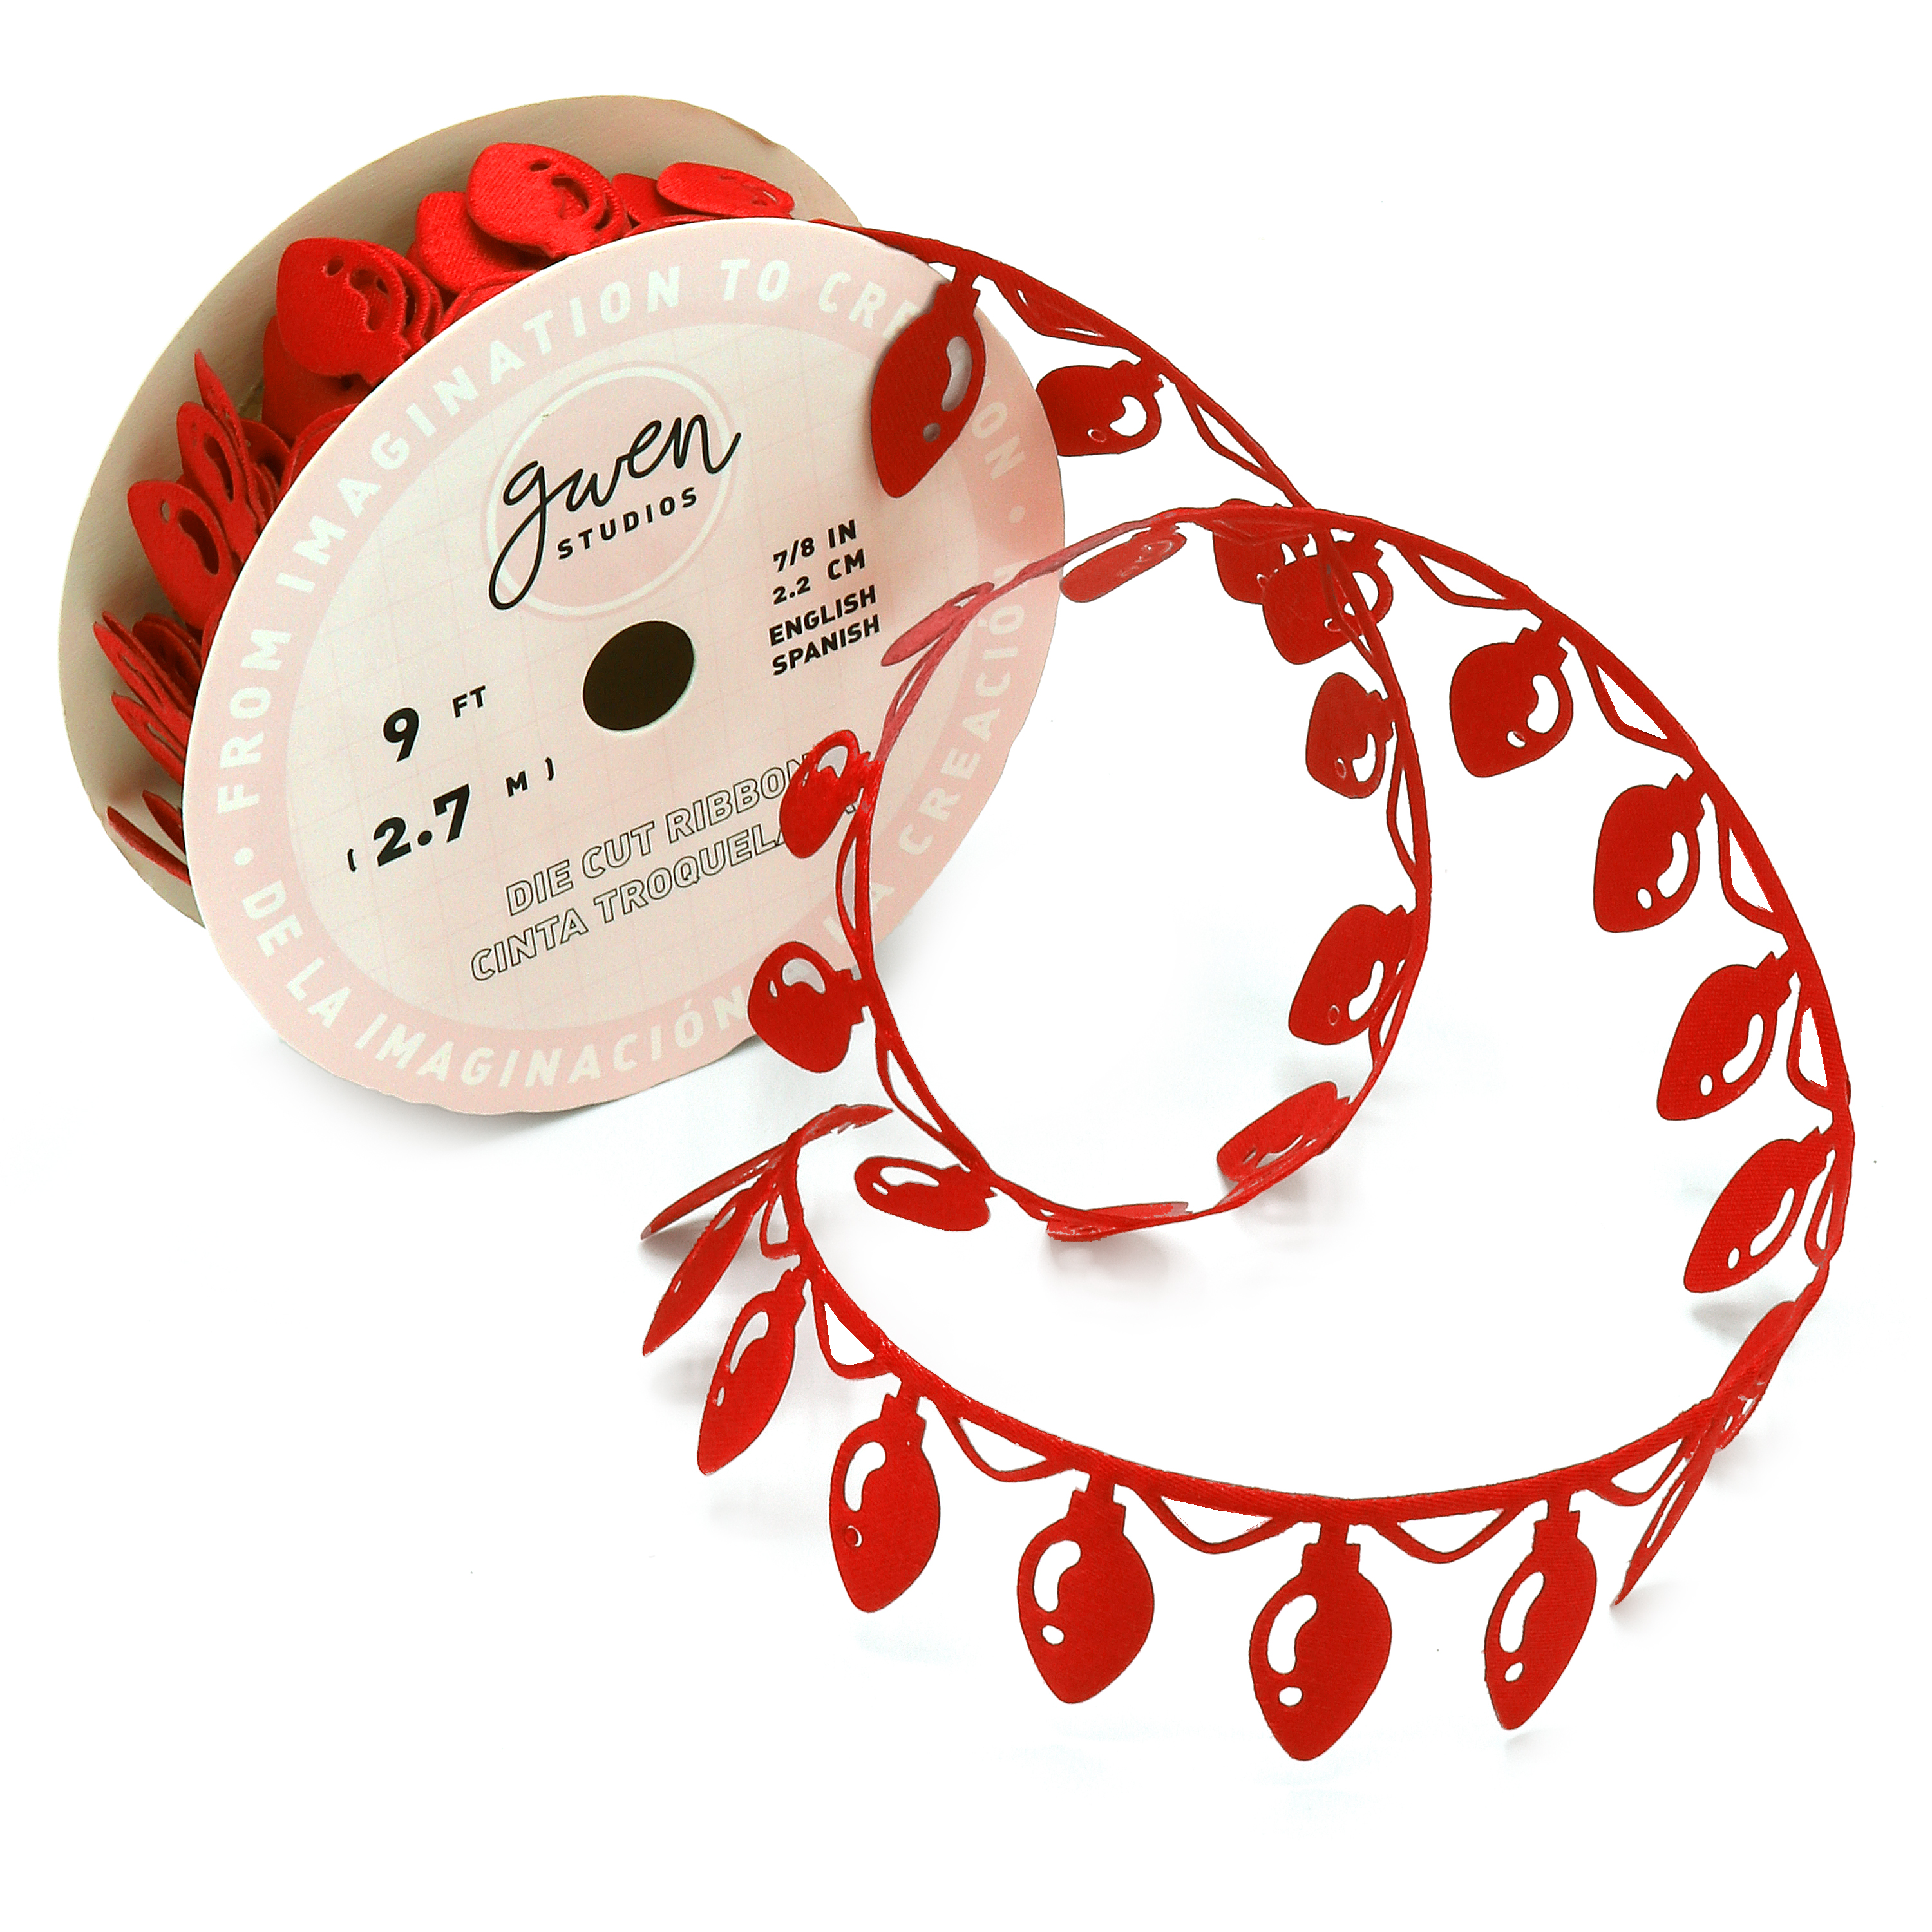 Die Cut Red Christmas Ribbon, Holiday Lights, 7/8" x 12 Yards by Gwen Studios - image 2 of 4